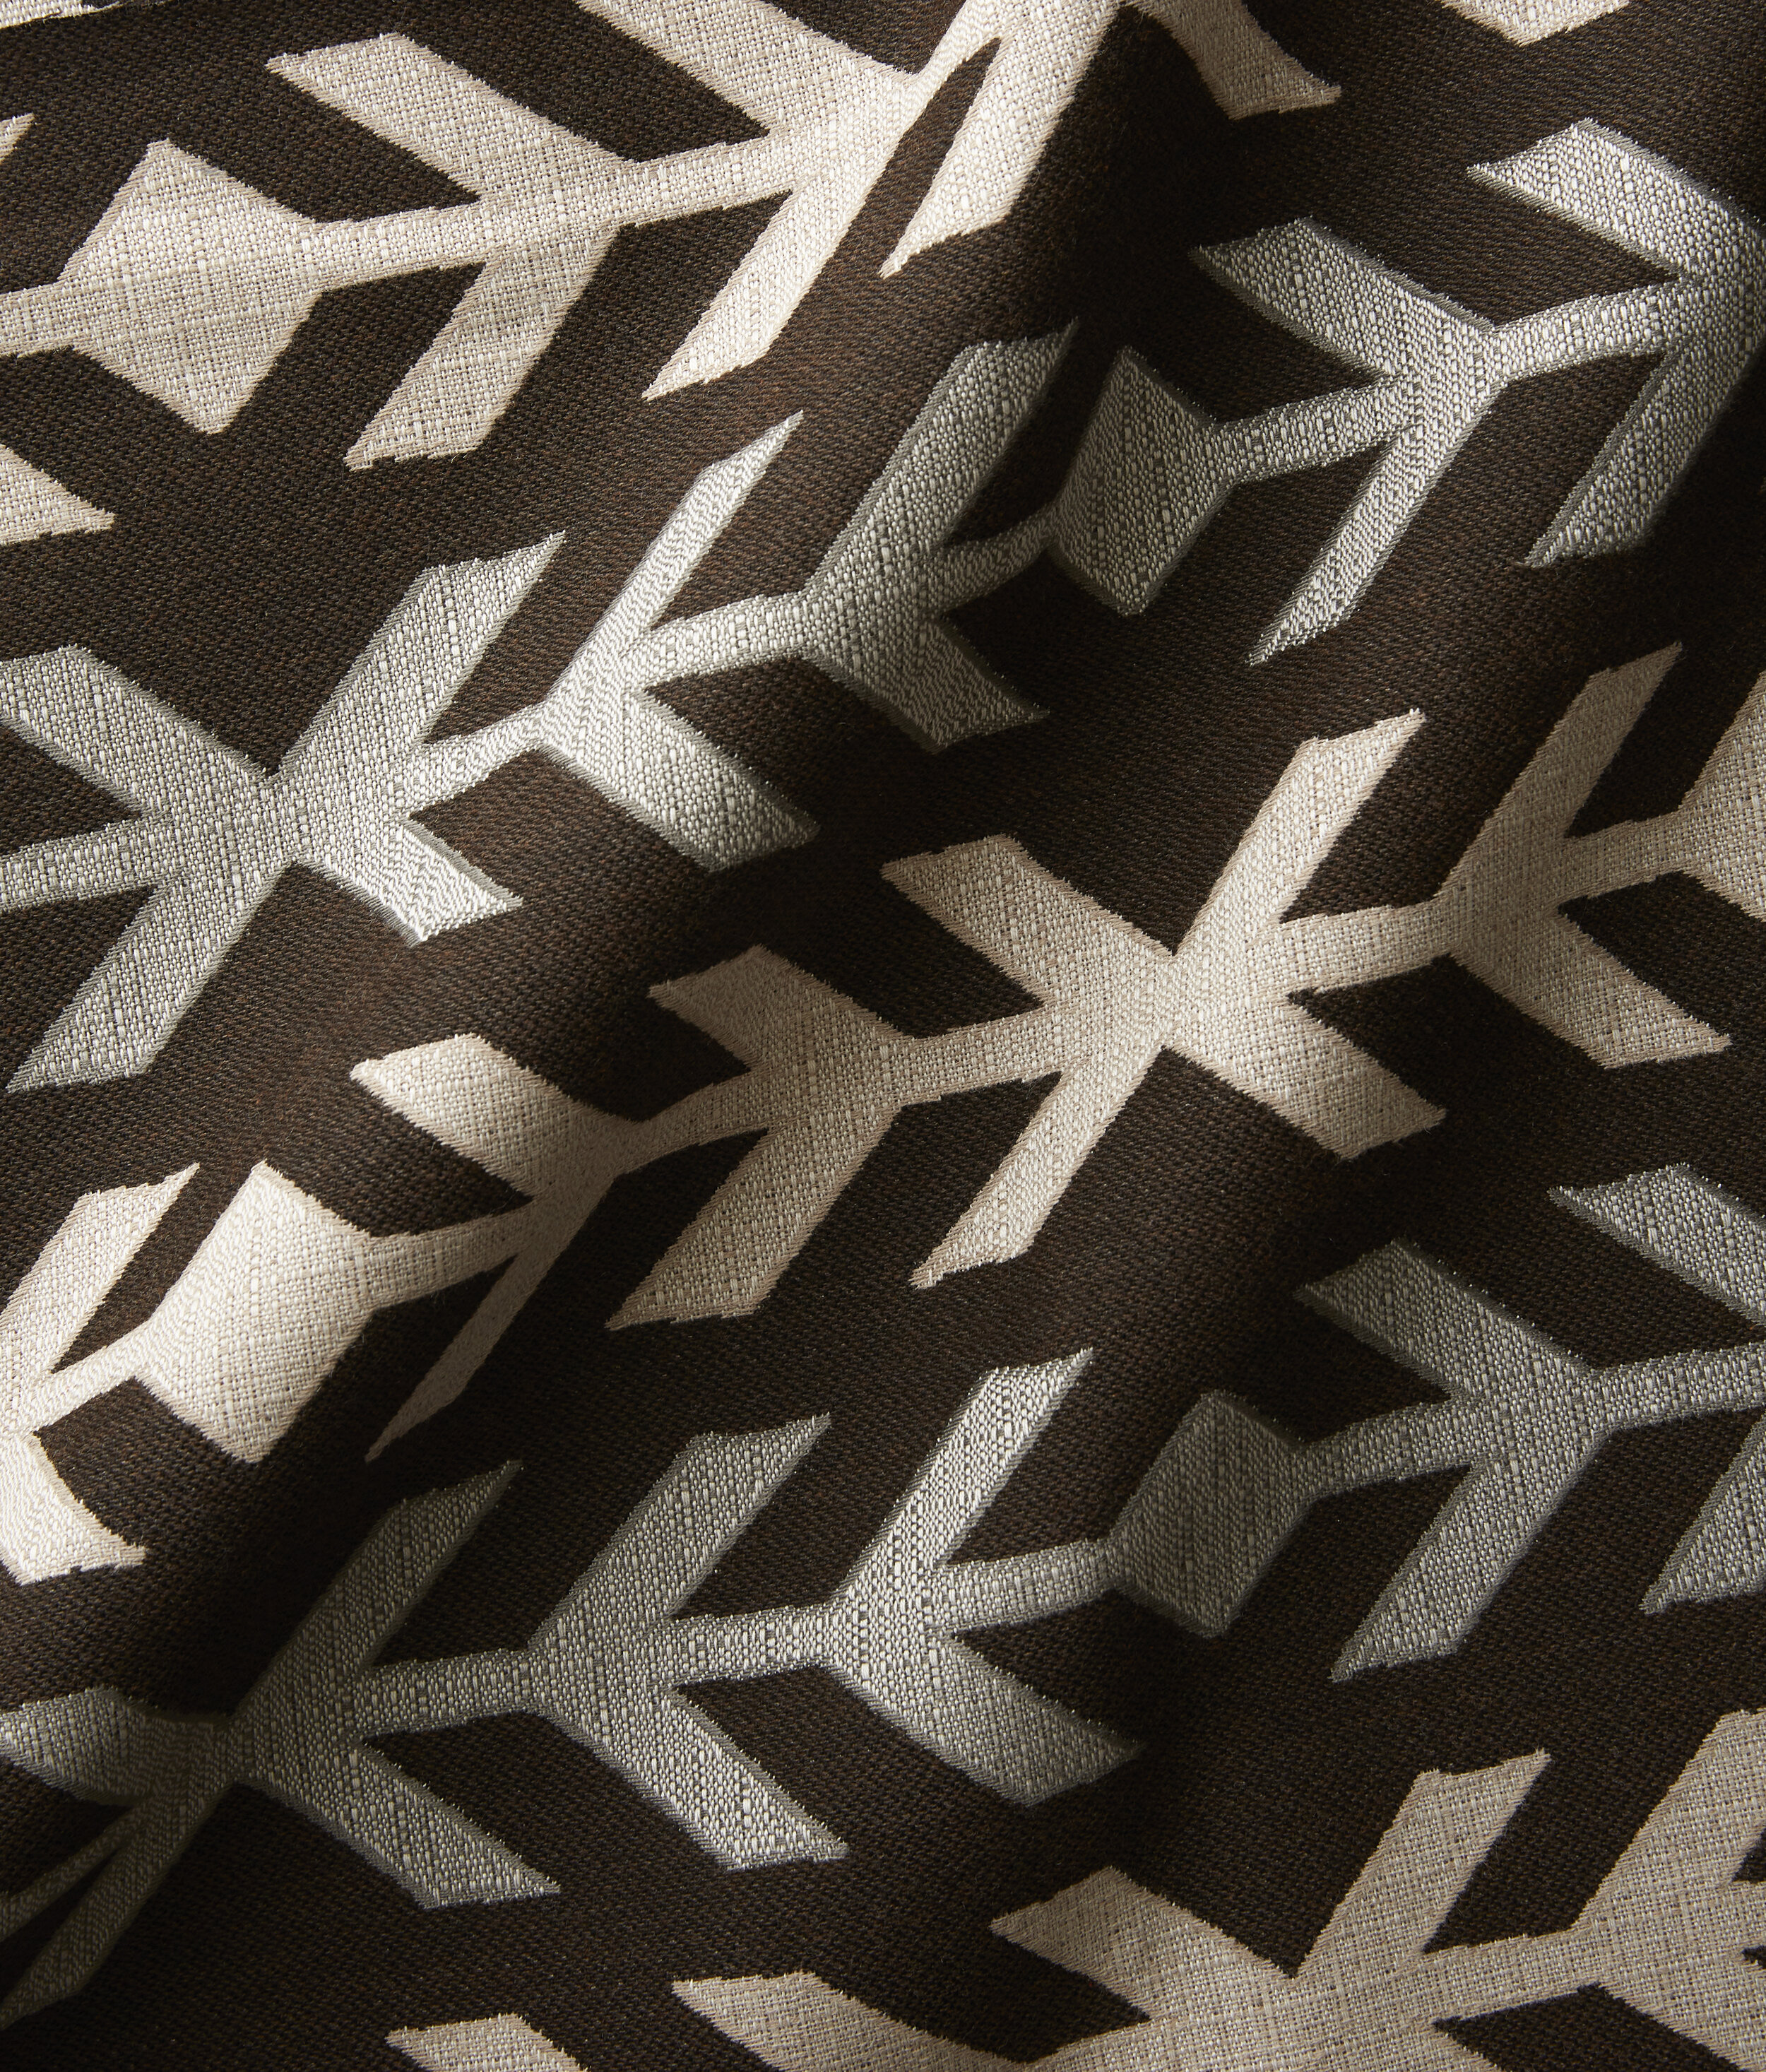 Sunbrella’s Addie II Espresso takes a subdued approach to pattern with shades of brown, gray and cream.